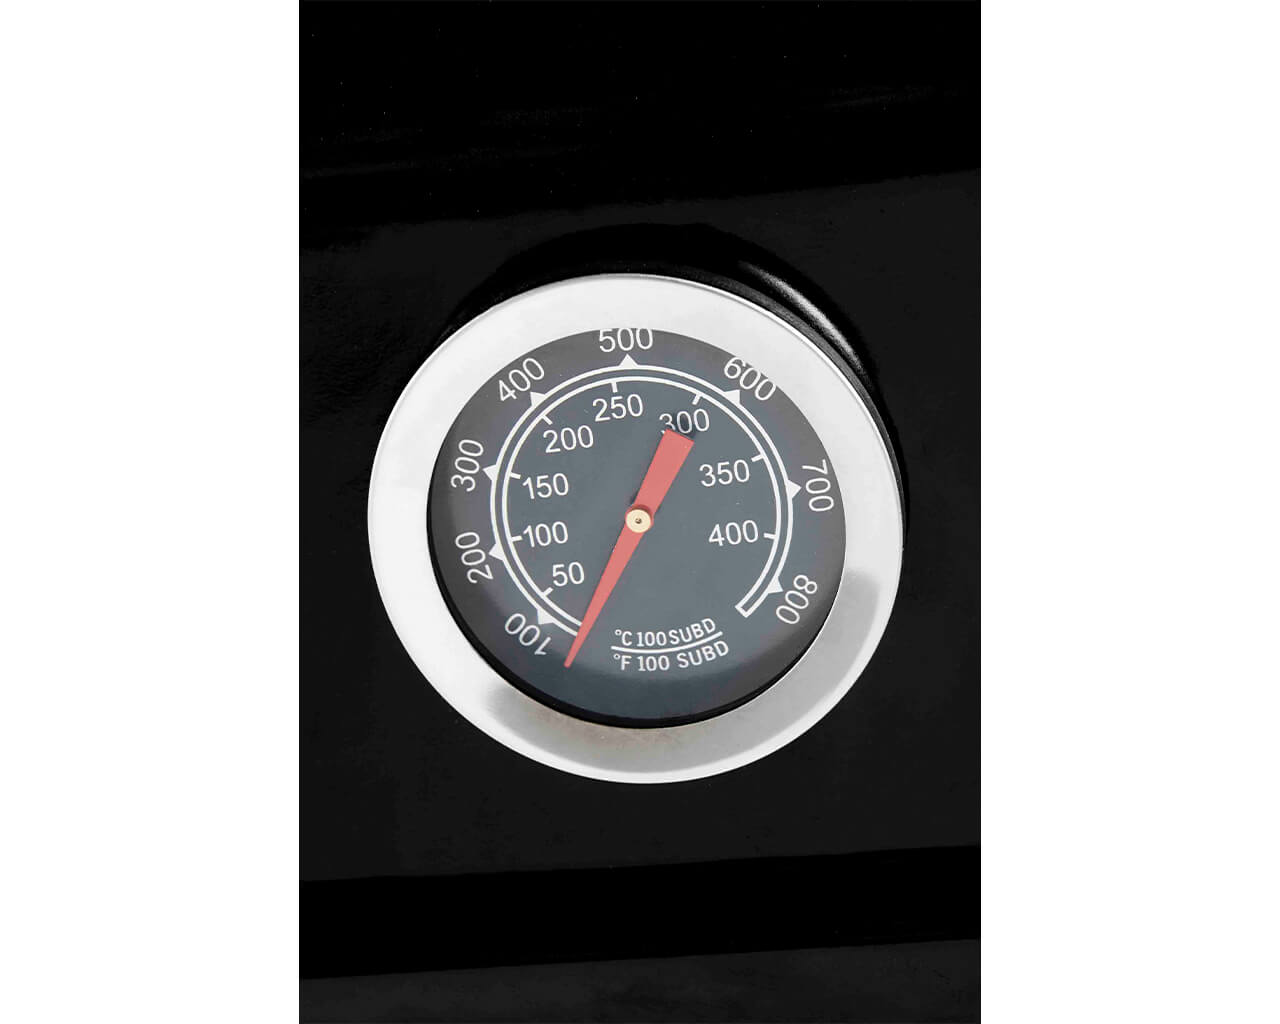 Billabong Portable Charcoal BBQ with Thermometer, , hi-res image number null